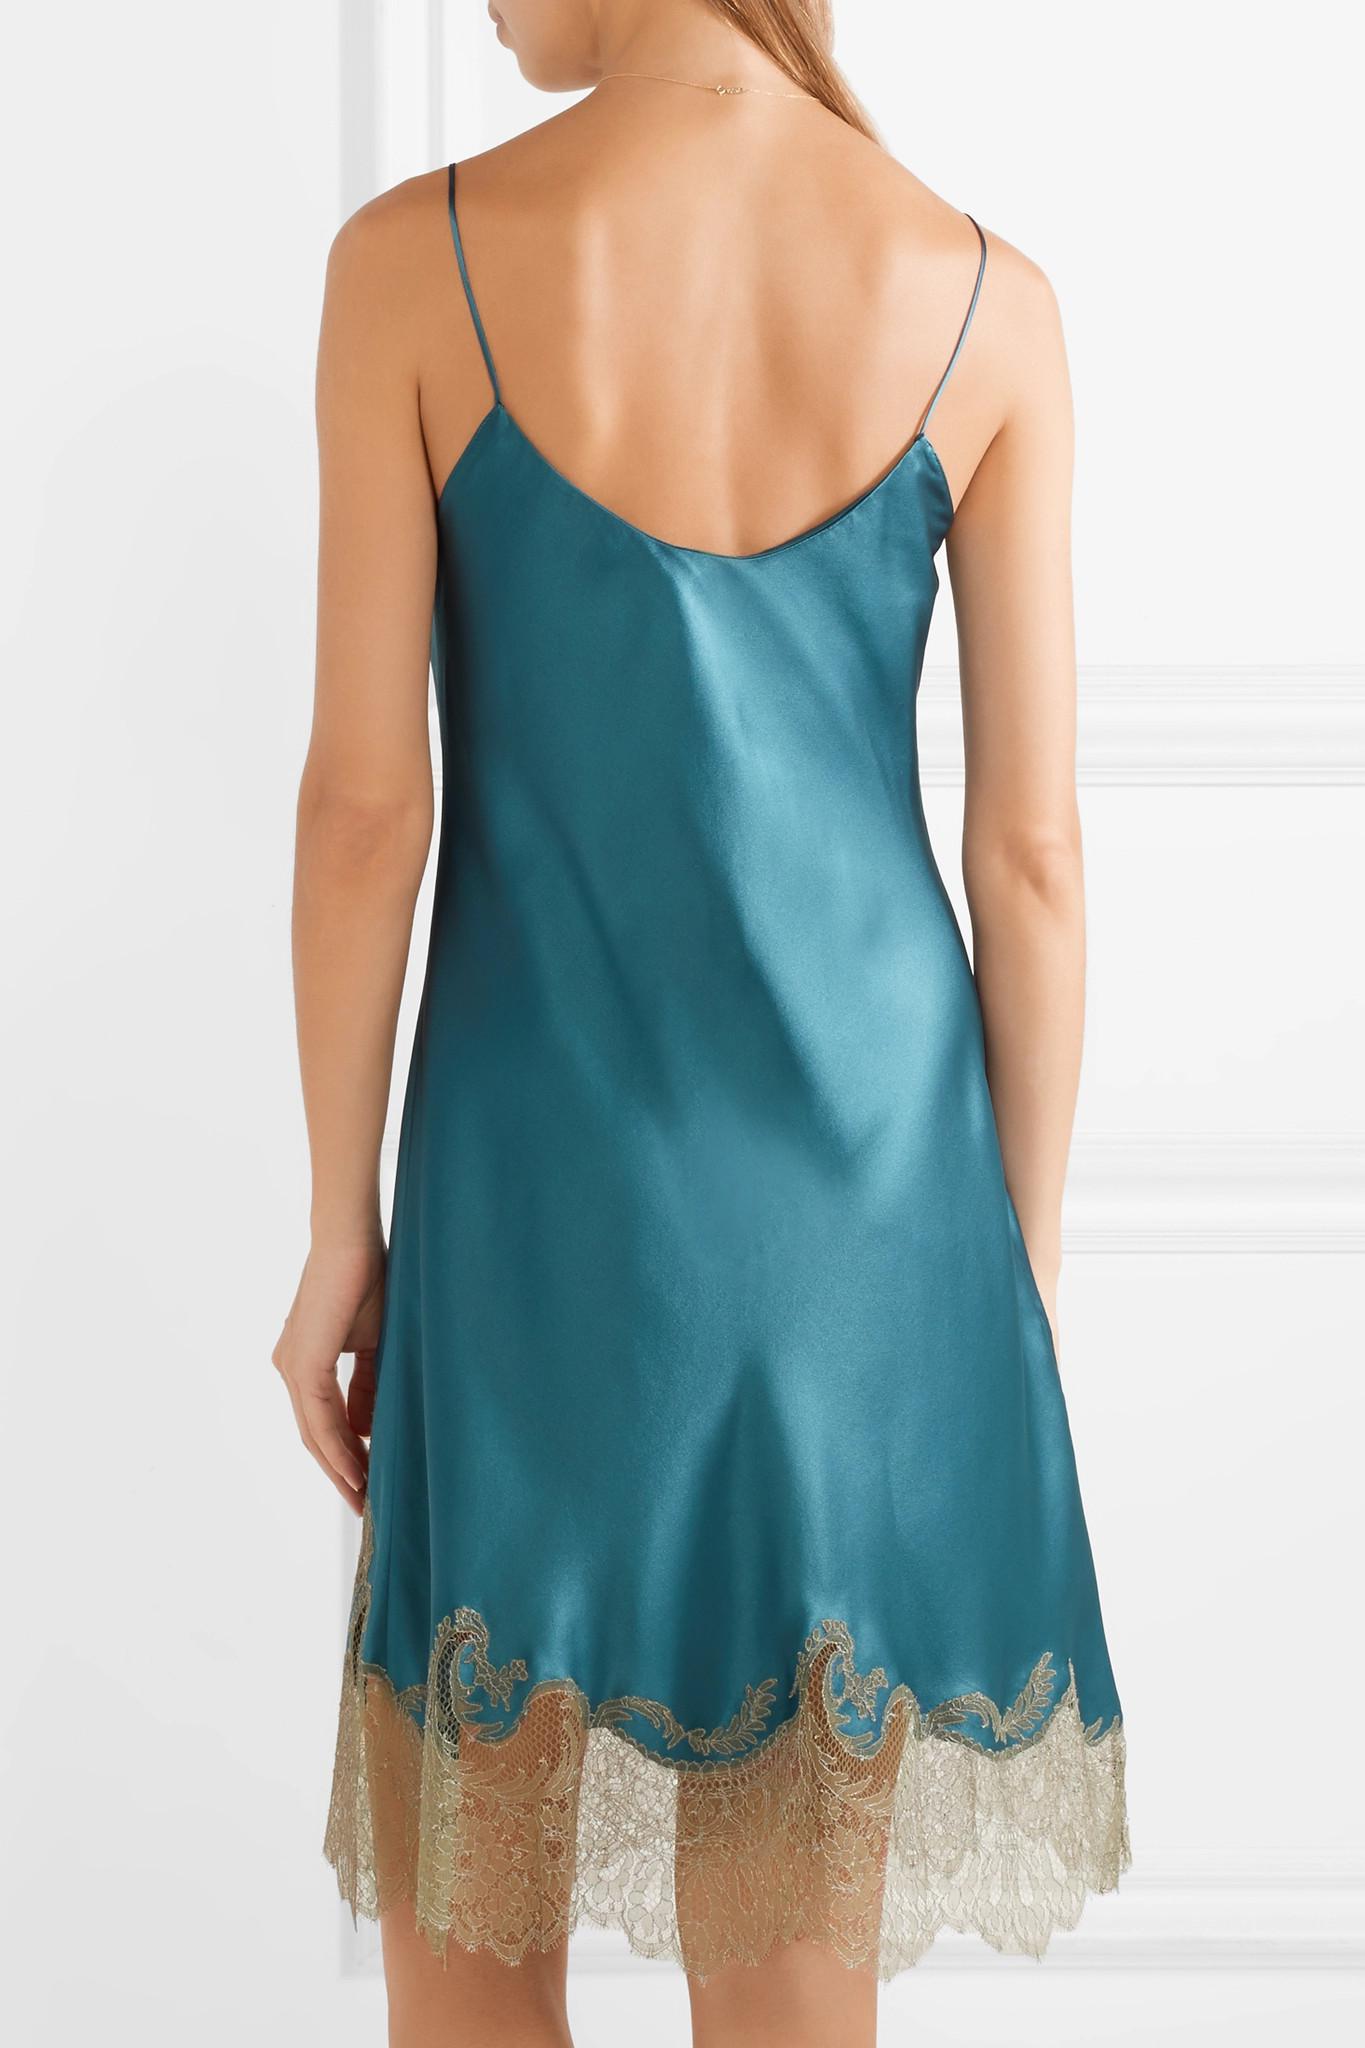 Carine Gilson Chantilly Lace-trimmed Silk-satin Chemise in Blue - Lyst